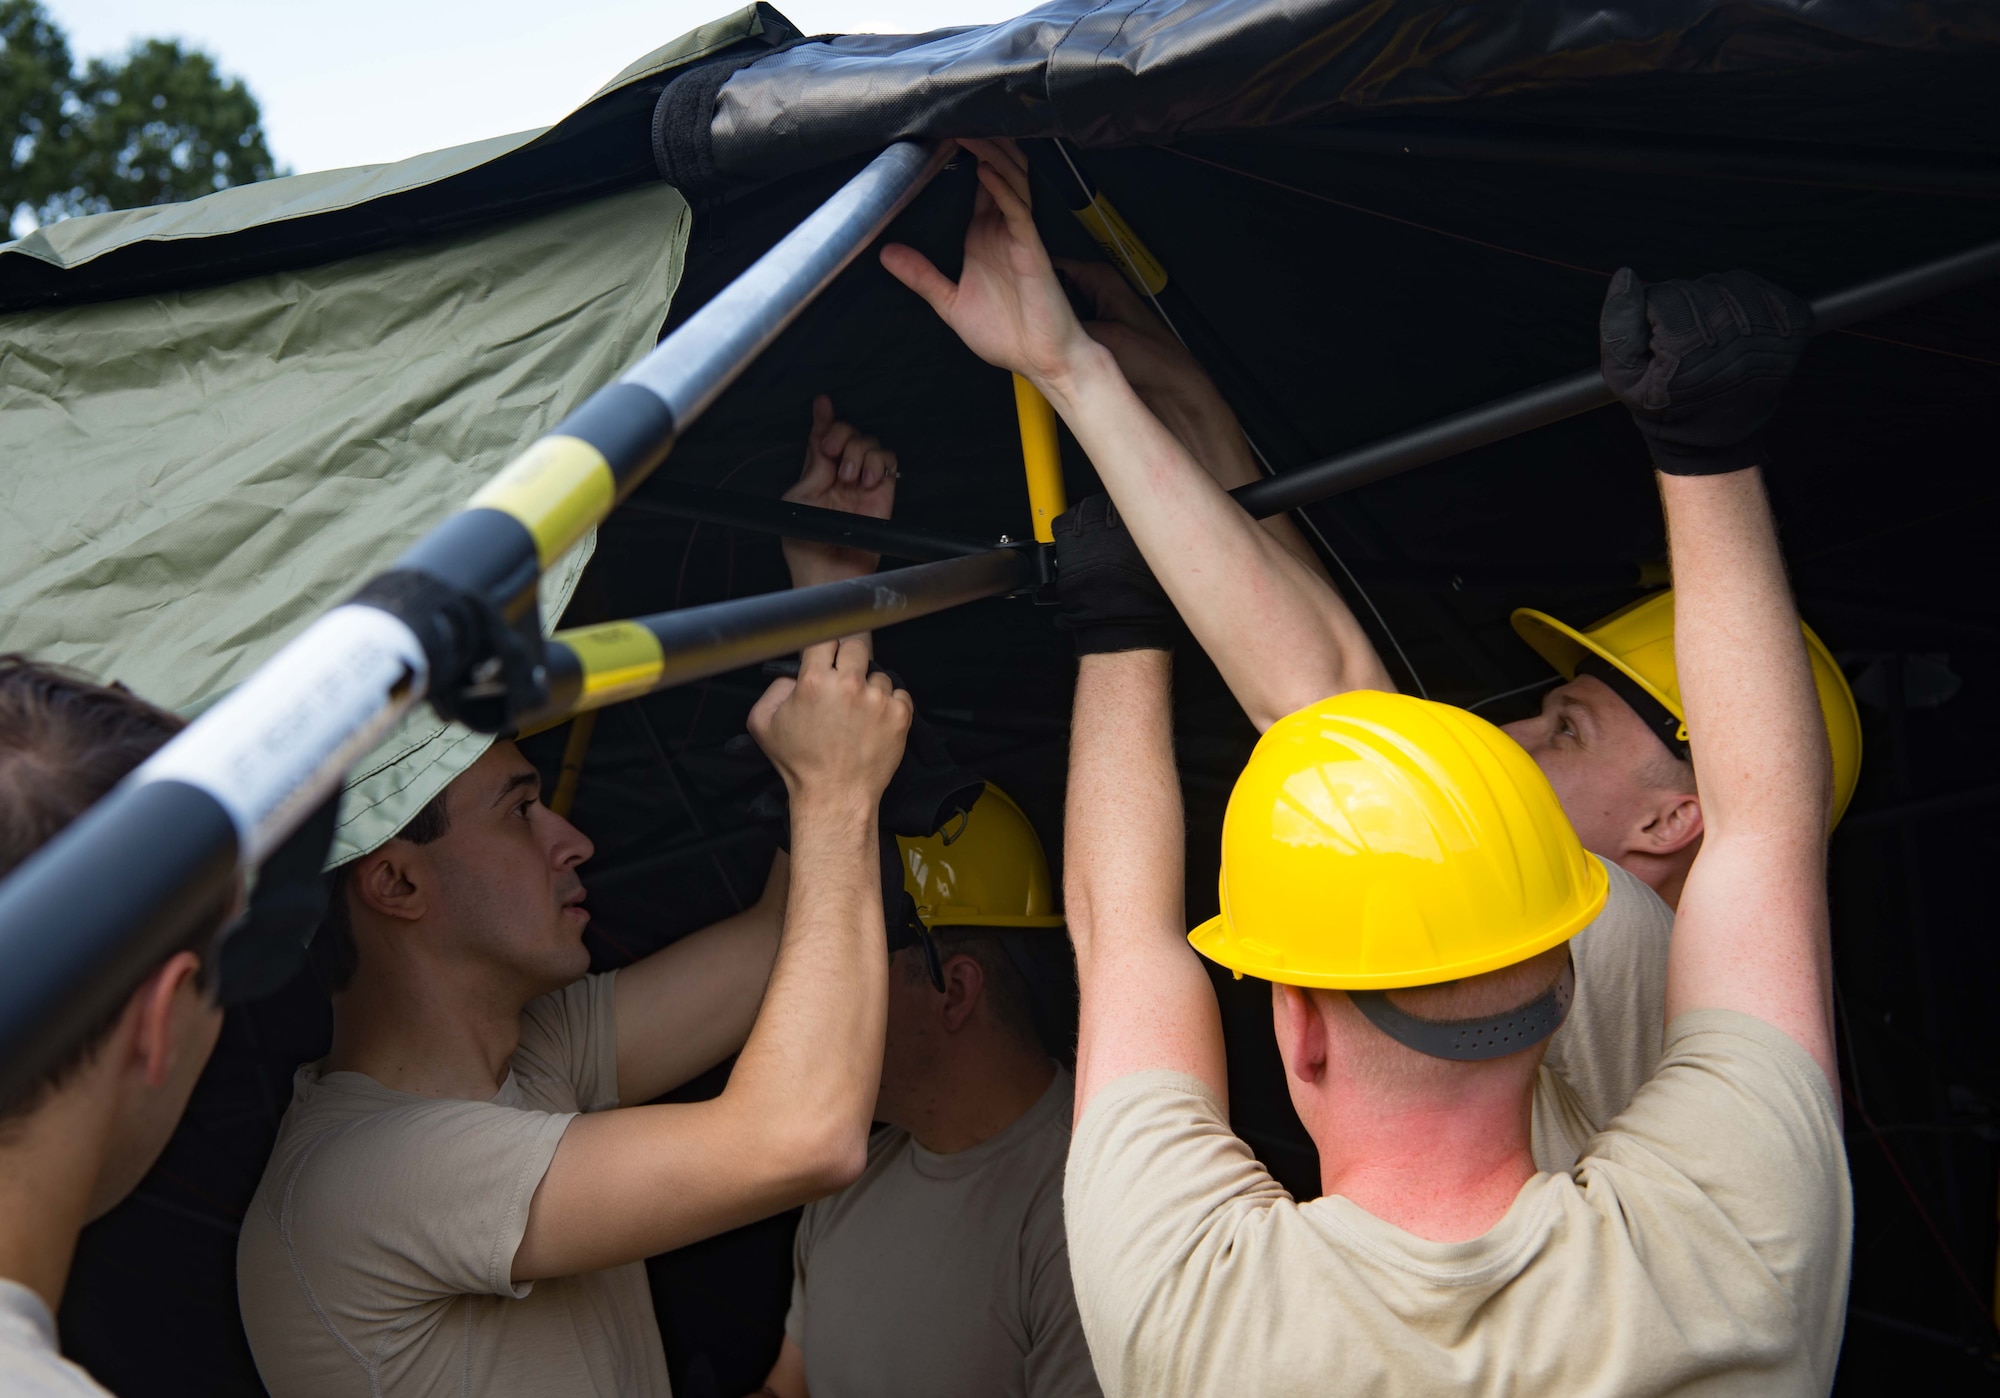 U.S. Airmen assigned to the 1st Combat Communications Squadron repair and assemble a communications tent during Exercise Lending Hand on Ramstein Air Base, Germany, Aug. 21, 2017.